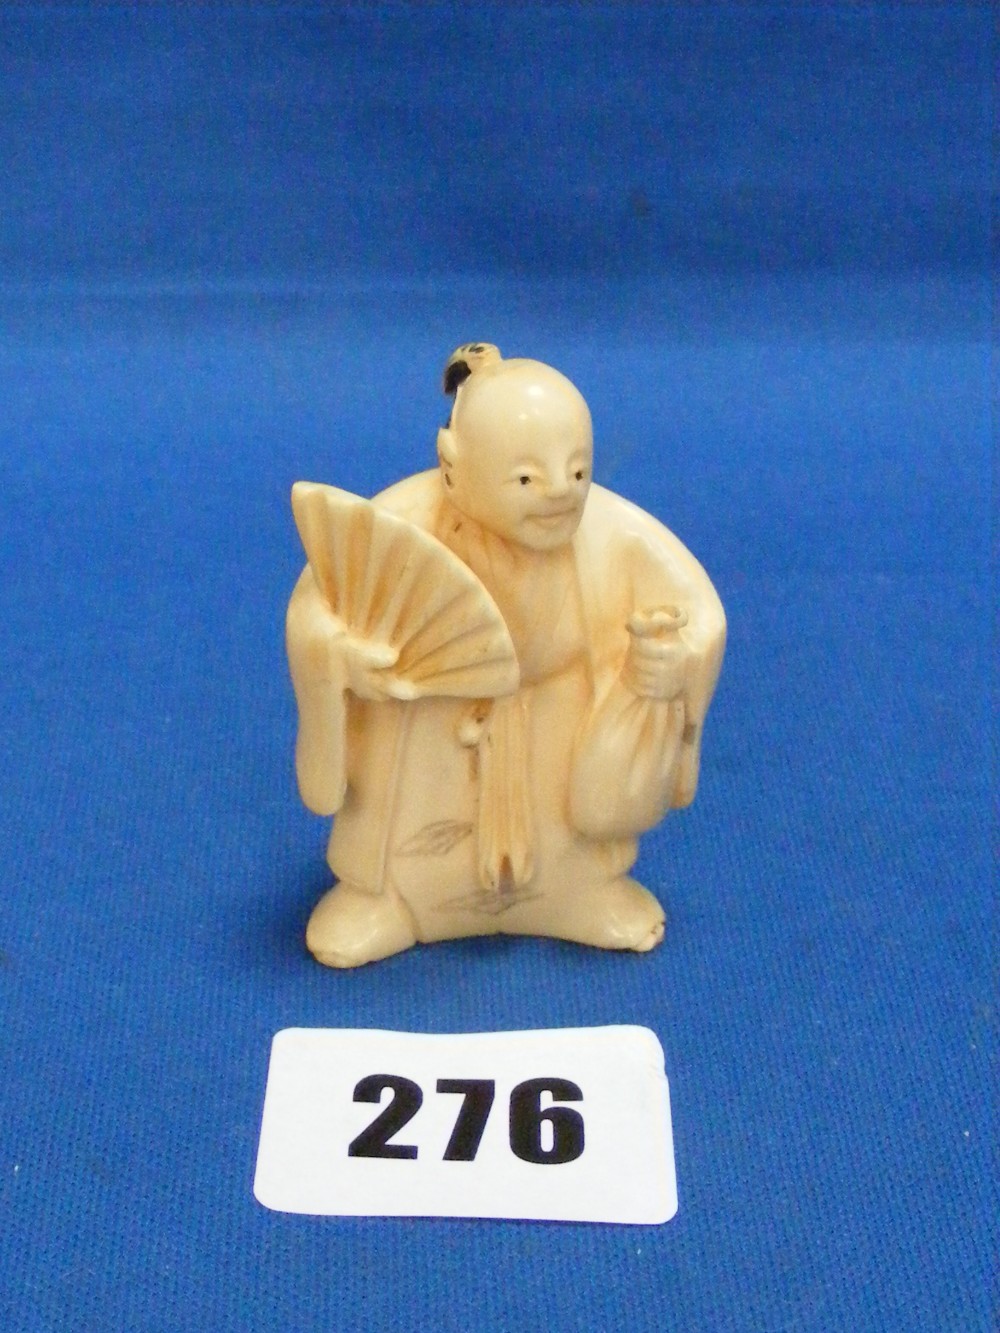 An ivory netsuke figure of an elder wearing robes, his black hair tied back in a bow, holding a